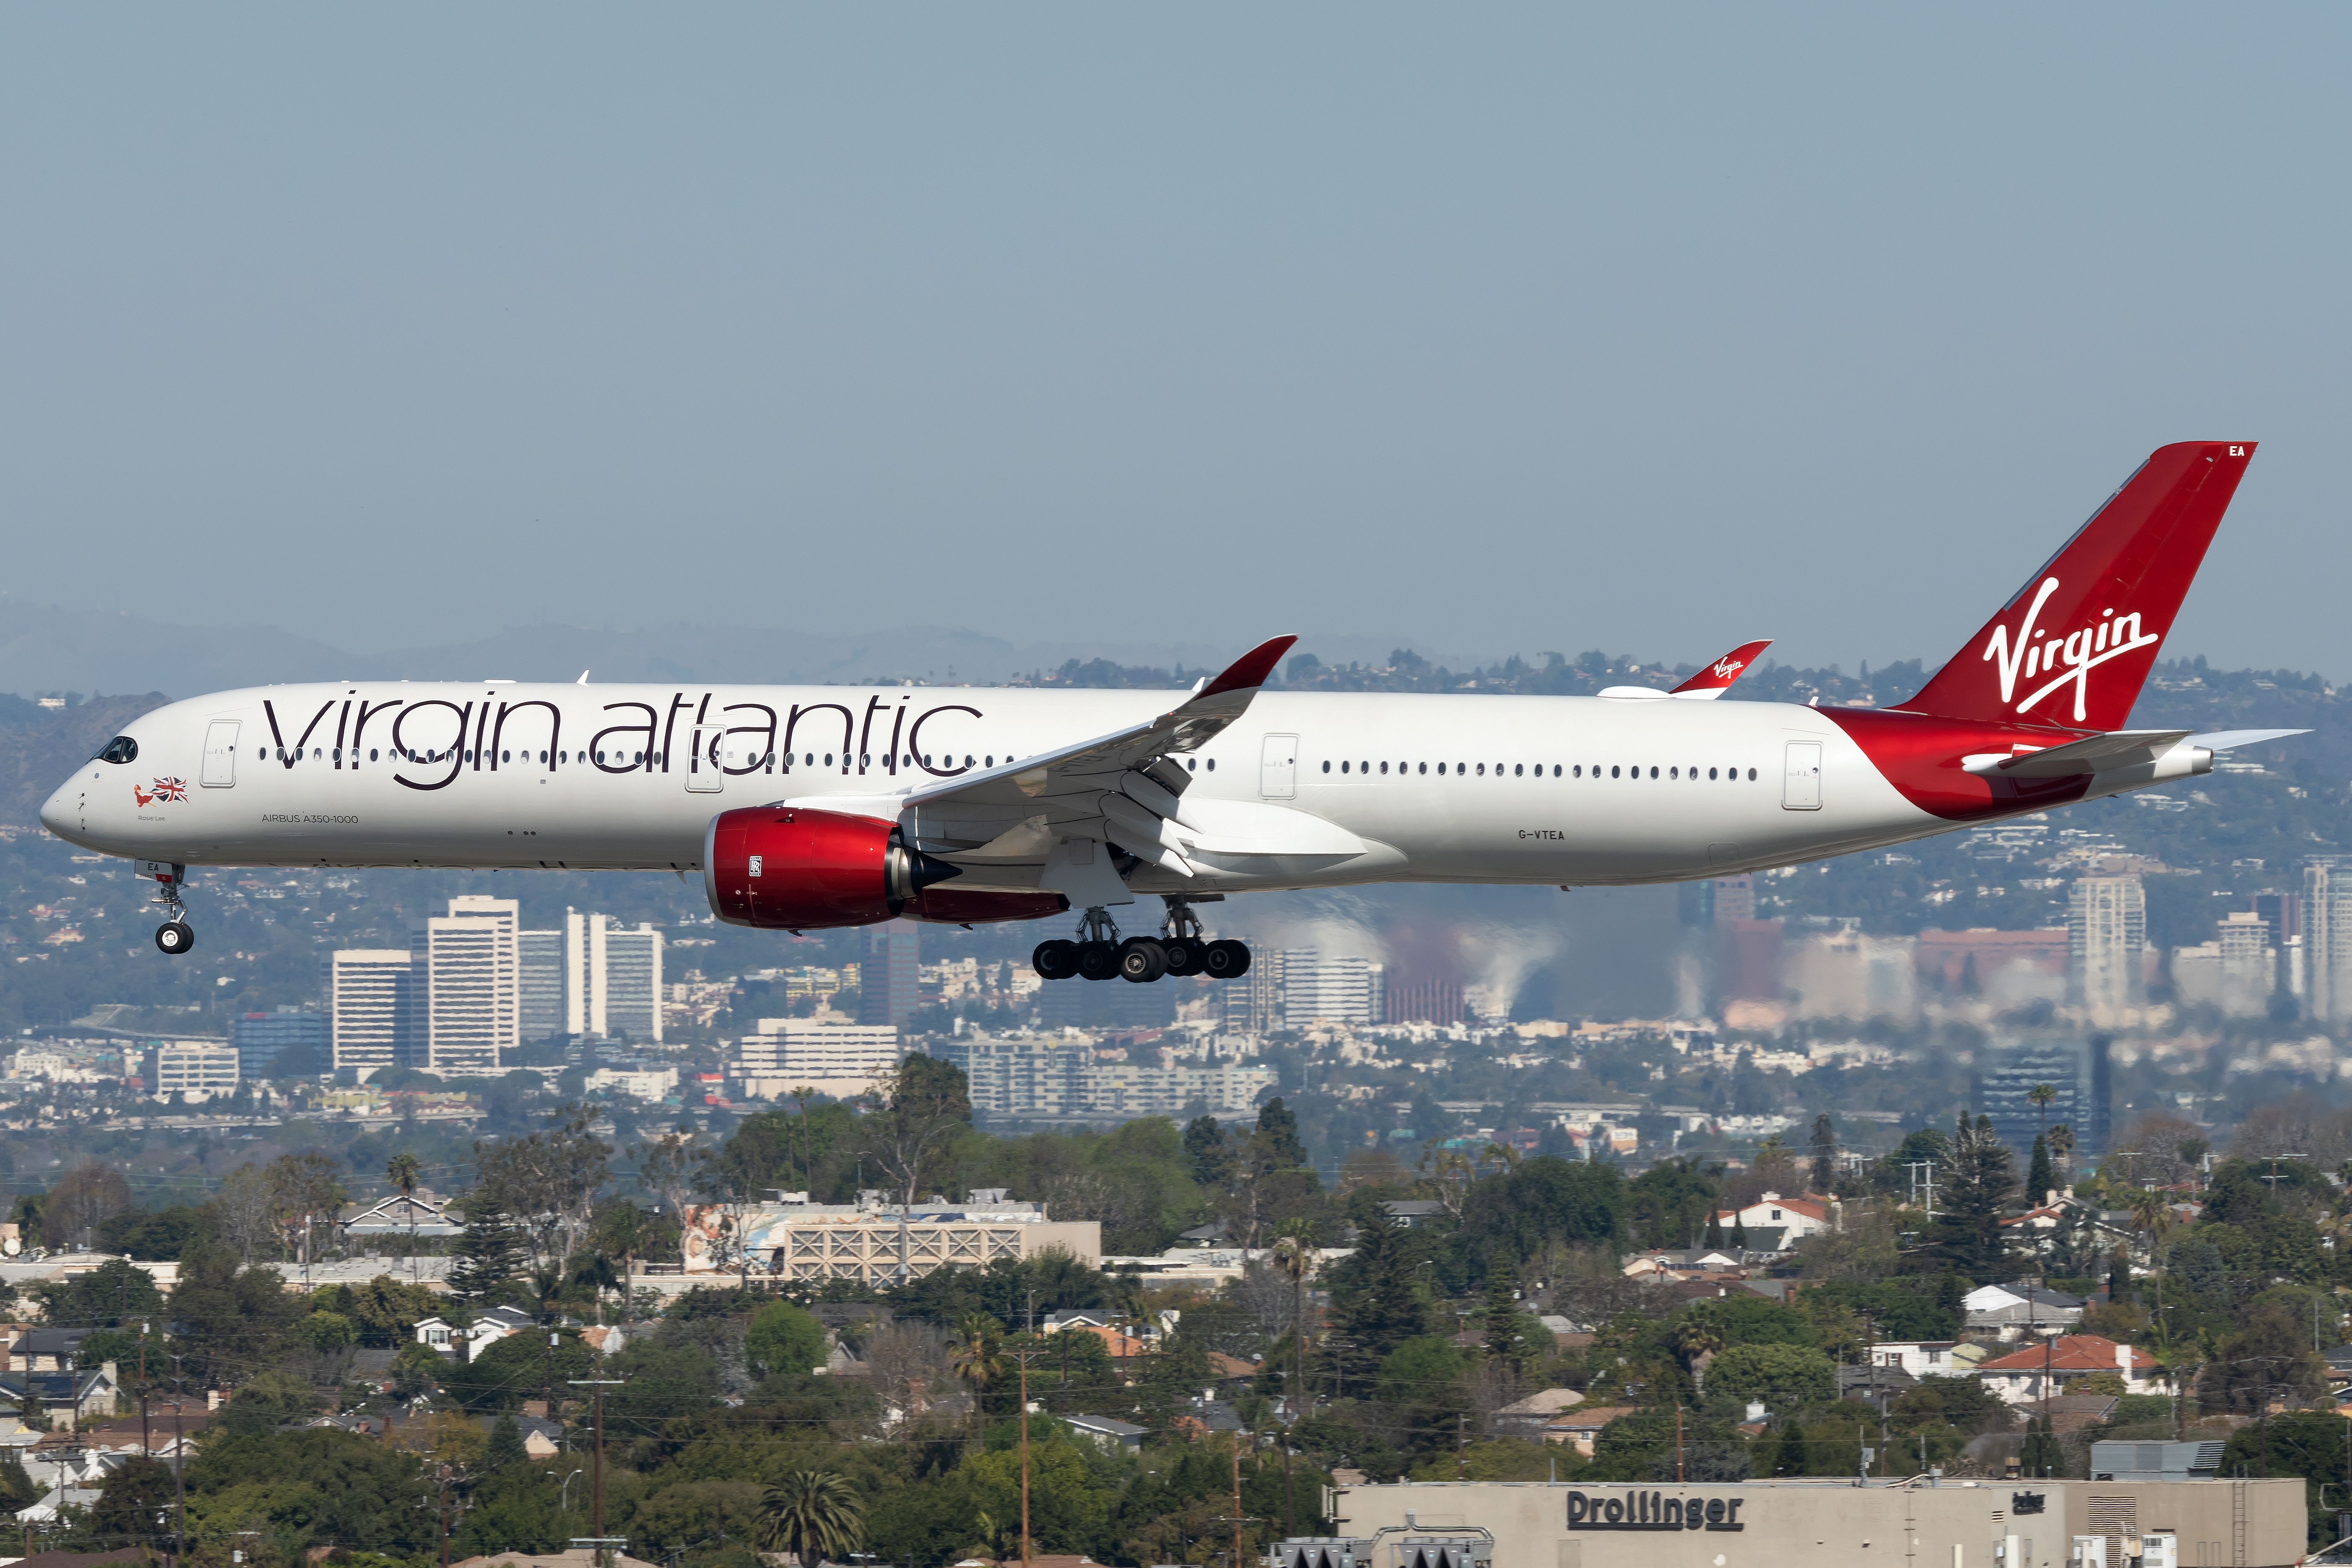 A Virgin Atlantic Airbus aircraft flies over the city of Los Angeles